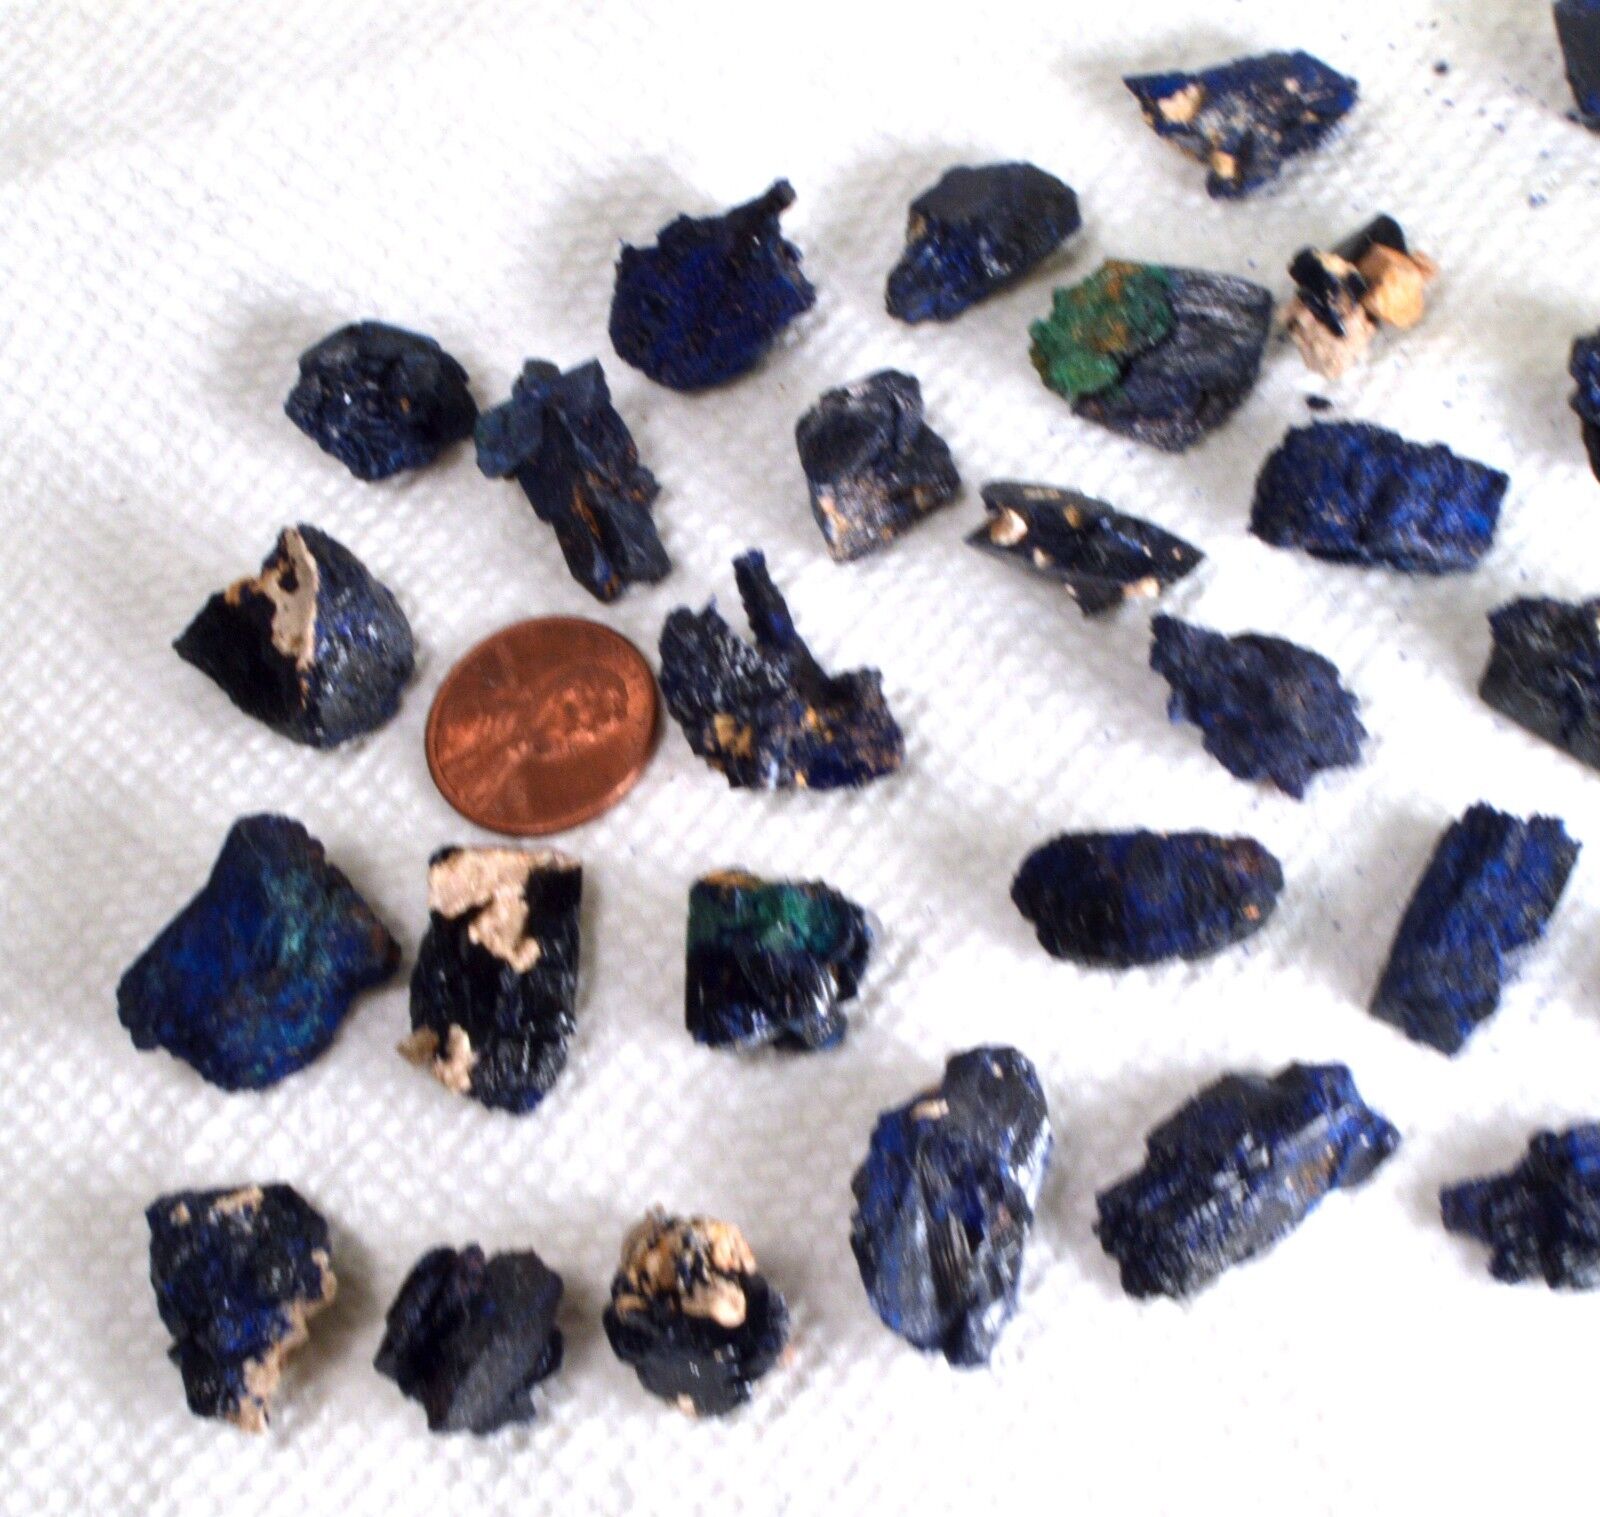 #5209 Azurite Crystals - Krochne, Morocco [ONE PIECE] Larger Size